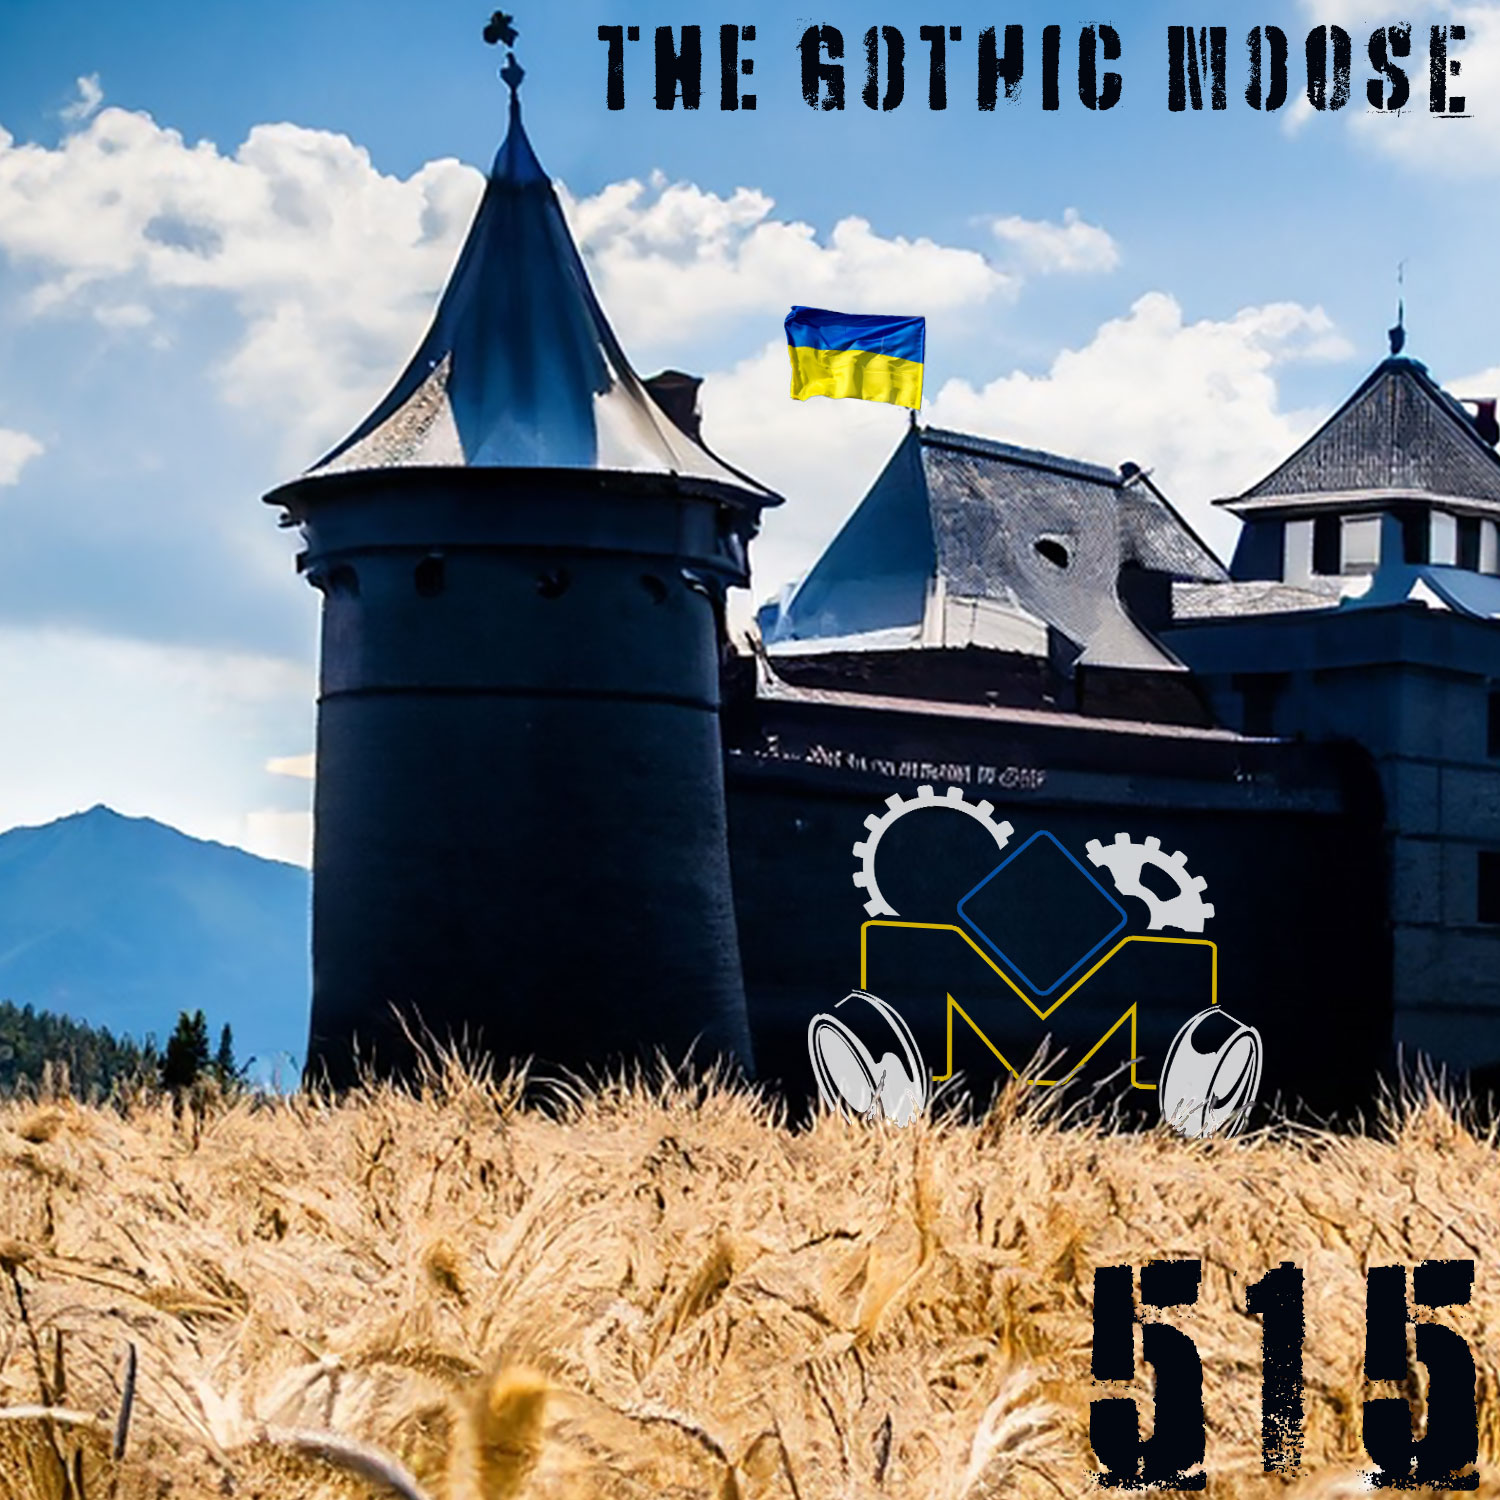 The Gothic Moose – Episode 515 – All Ukrainian bands or bands supporting Ukraine